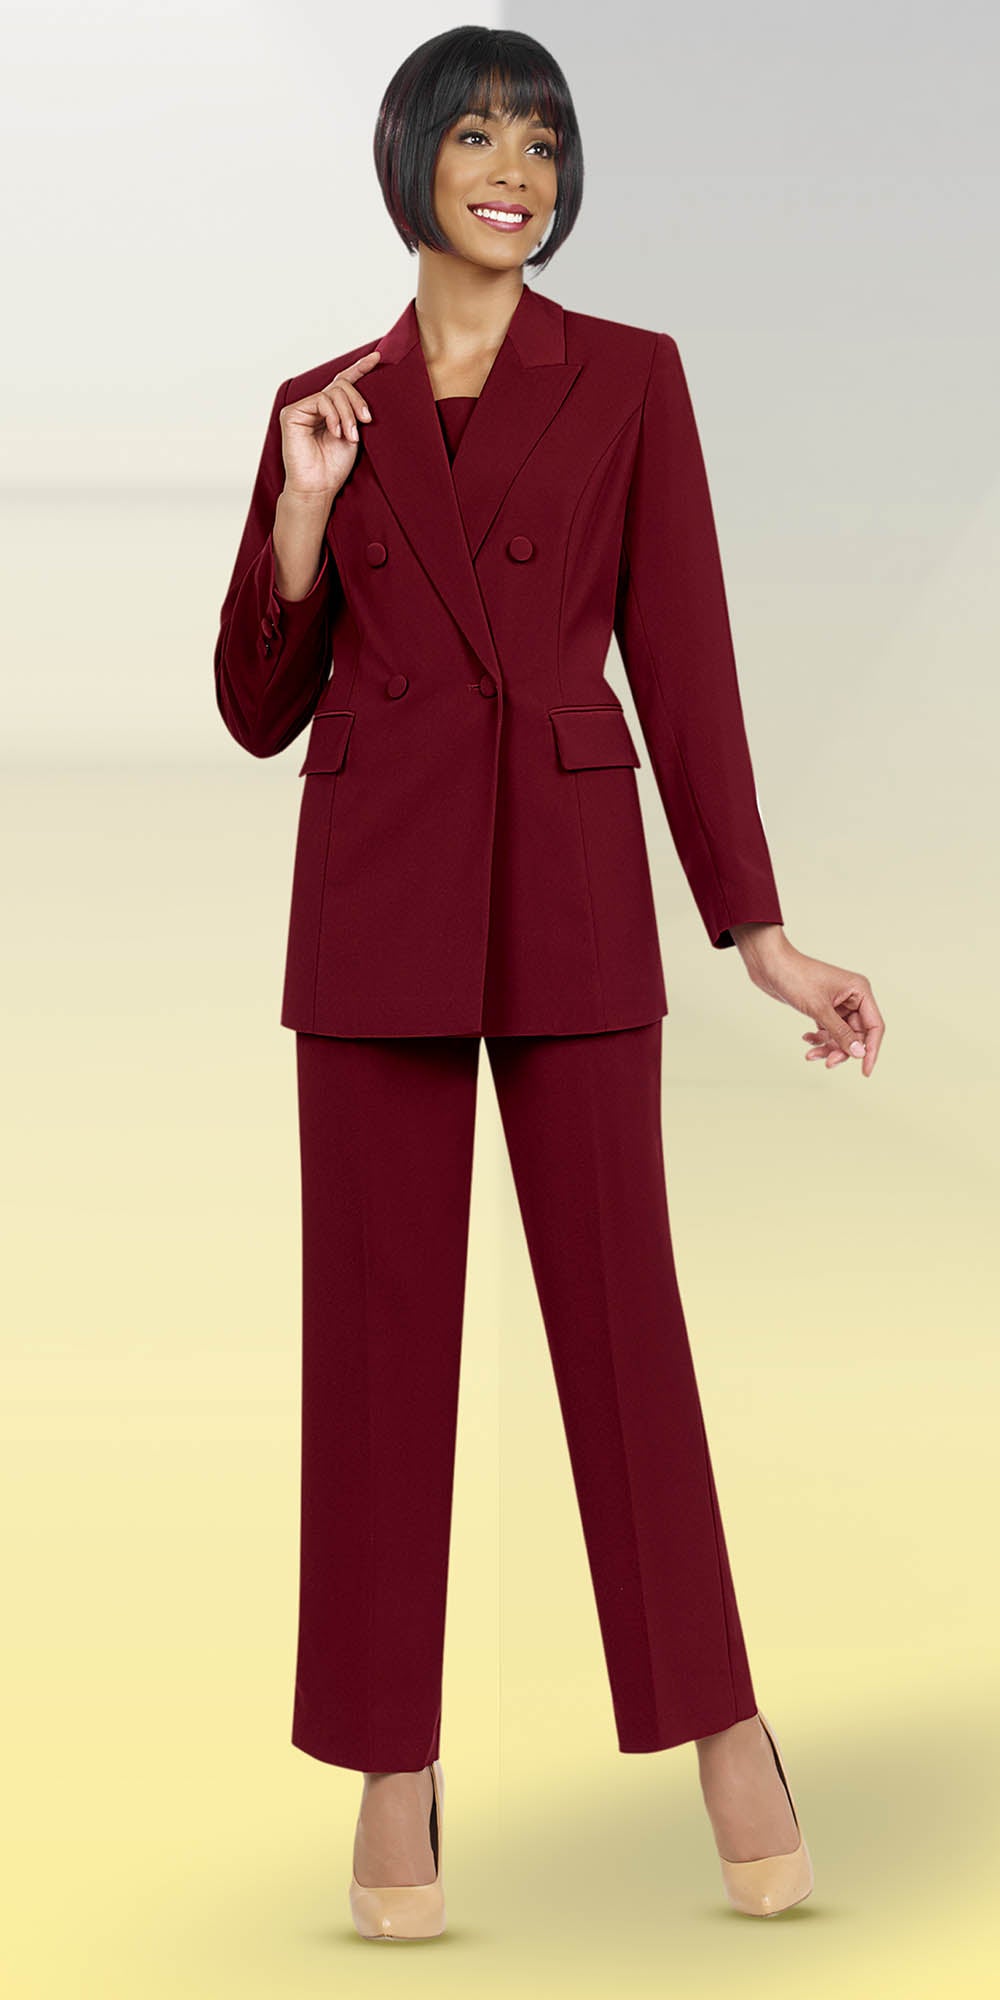 Ben Marc Executive 10498-Burgundy - Double Breasted Pant Suit For Women